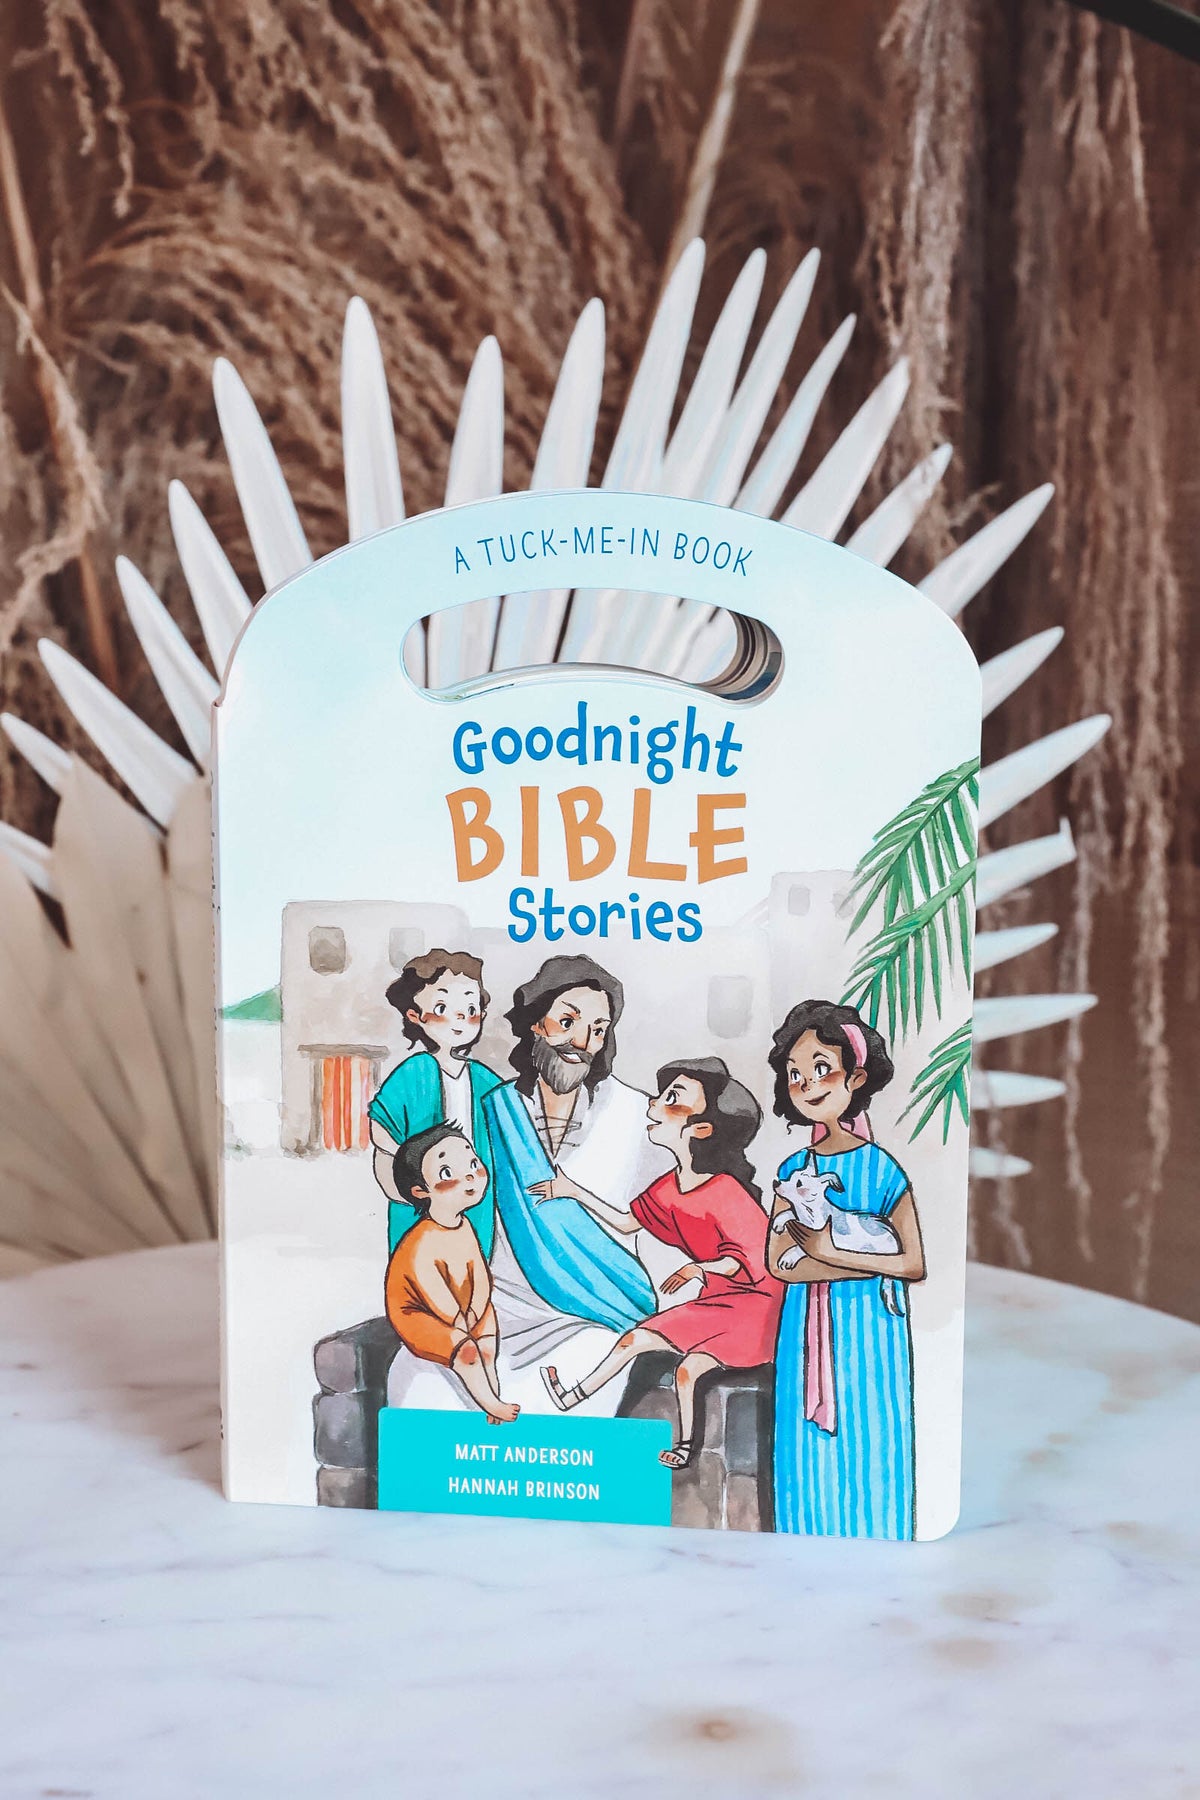 Goodnight Bible Stories by Matt Anderson and Hannah Brinson